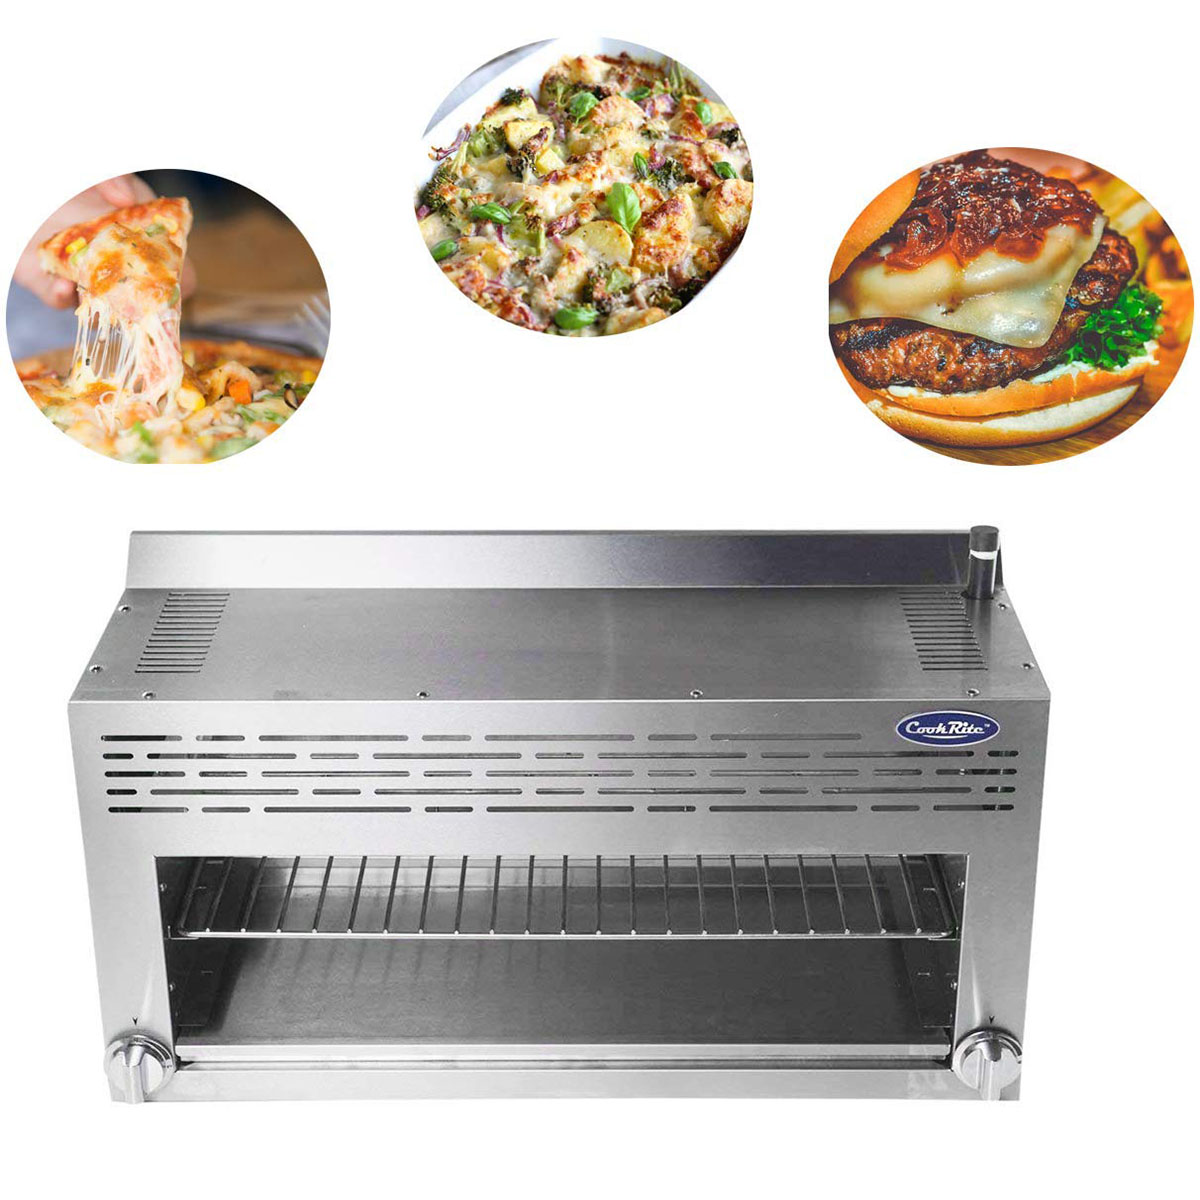 Atosa ATCM-36 Infrared Cheese Melter 36"W, Wall or Range Mount - Natural Gas image 2